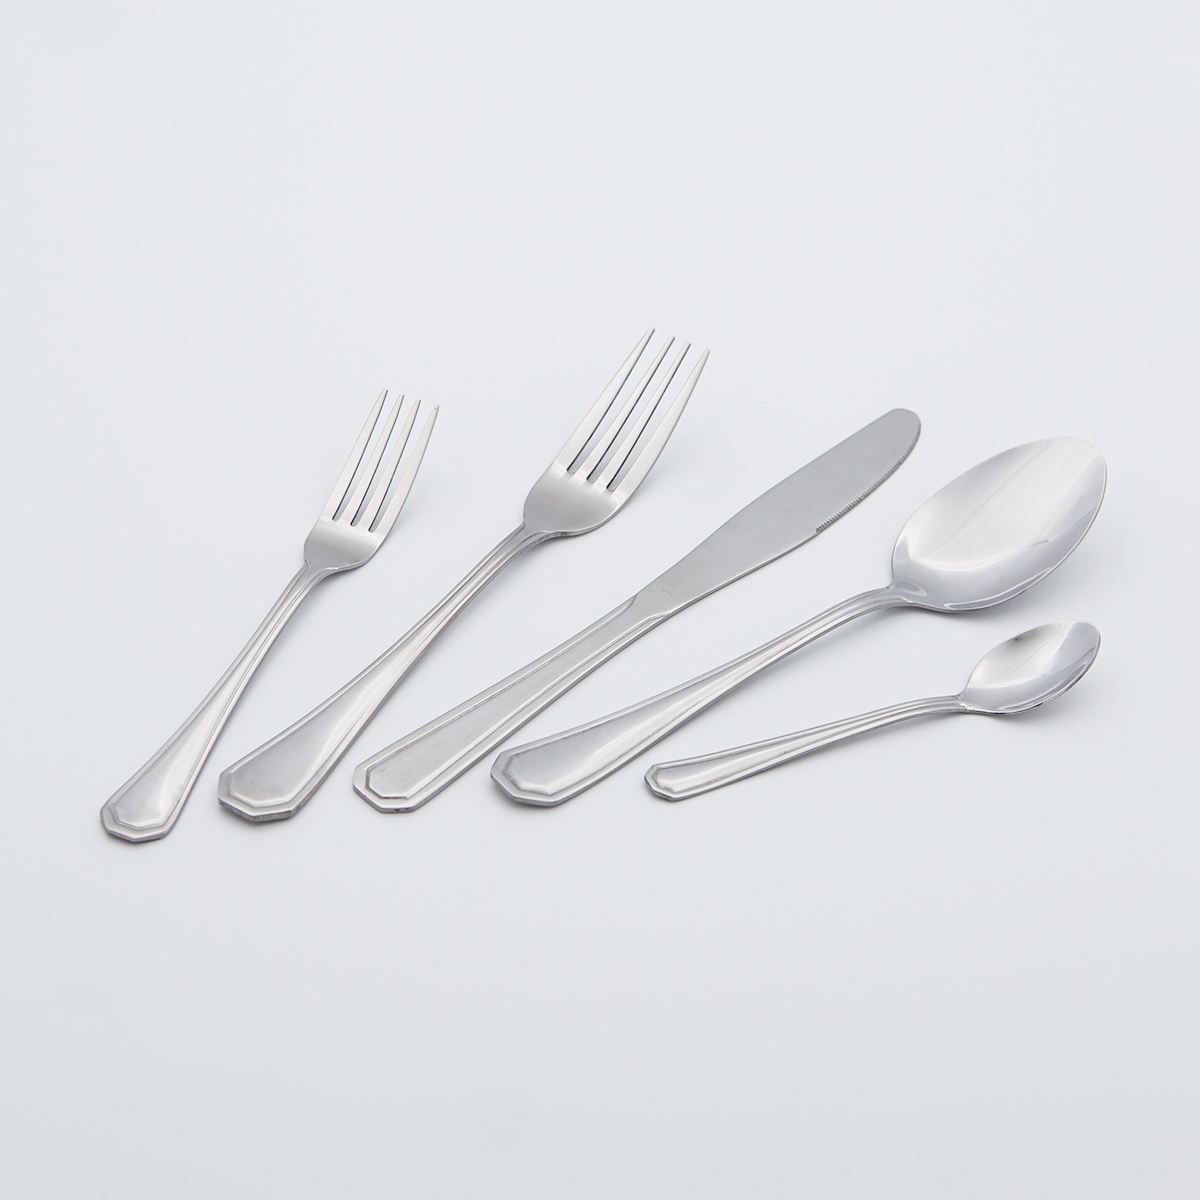 Wholesale Serving Spoon High Mirror Polish Unique Stainless Steel Cutlery Set